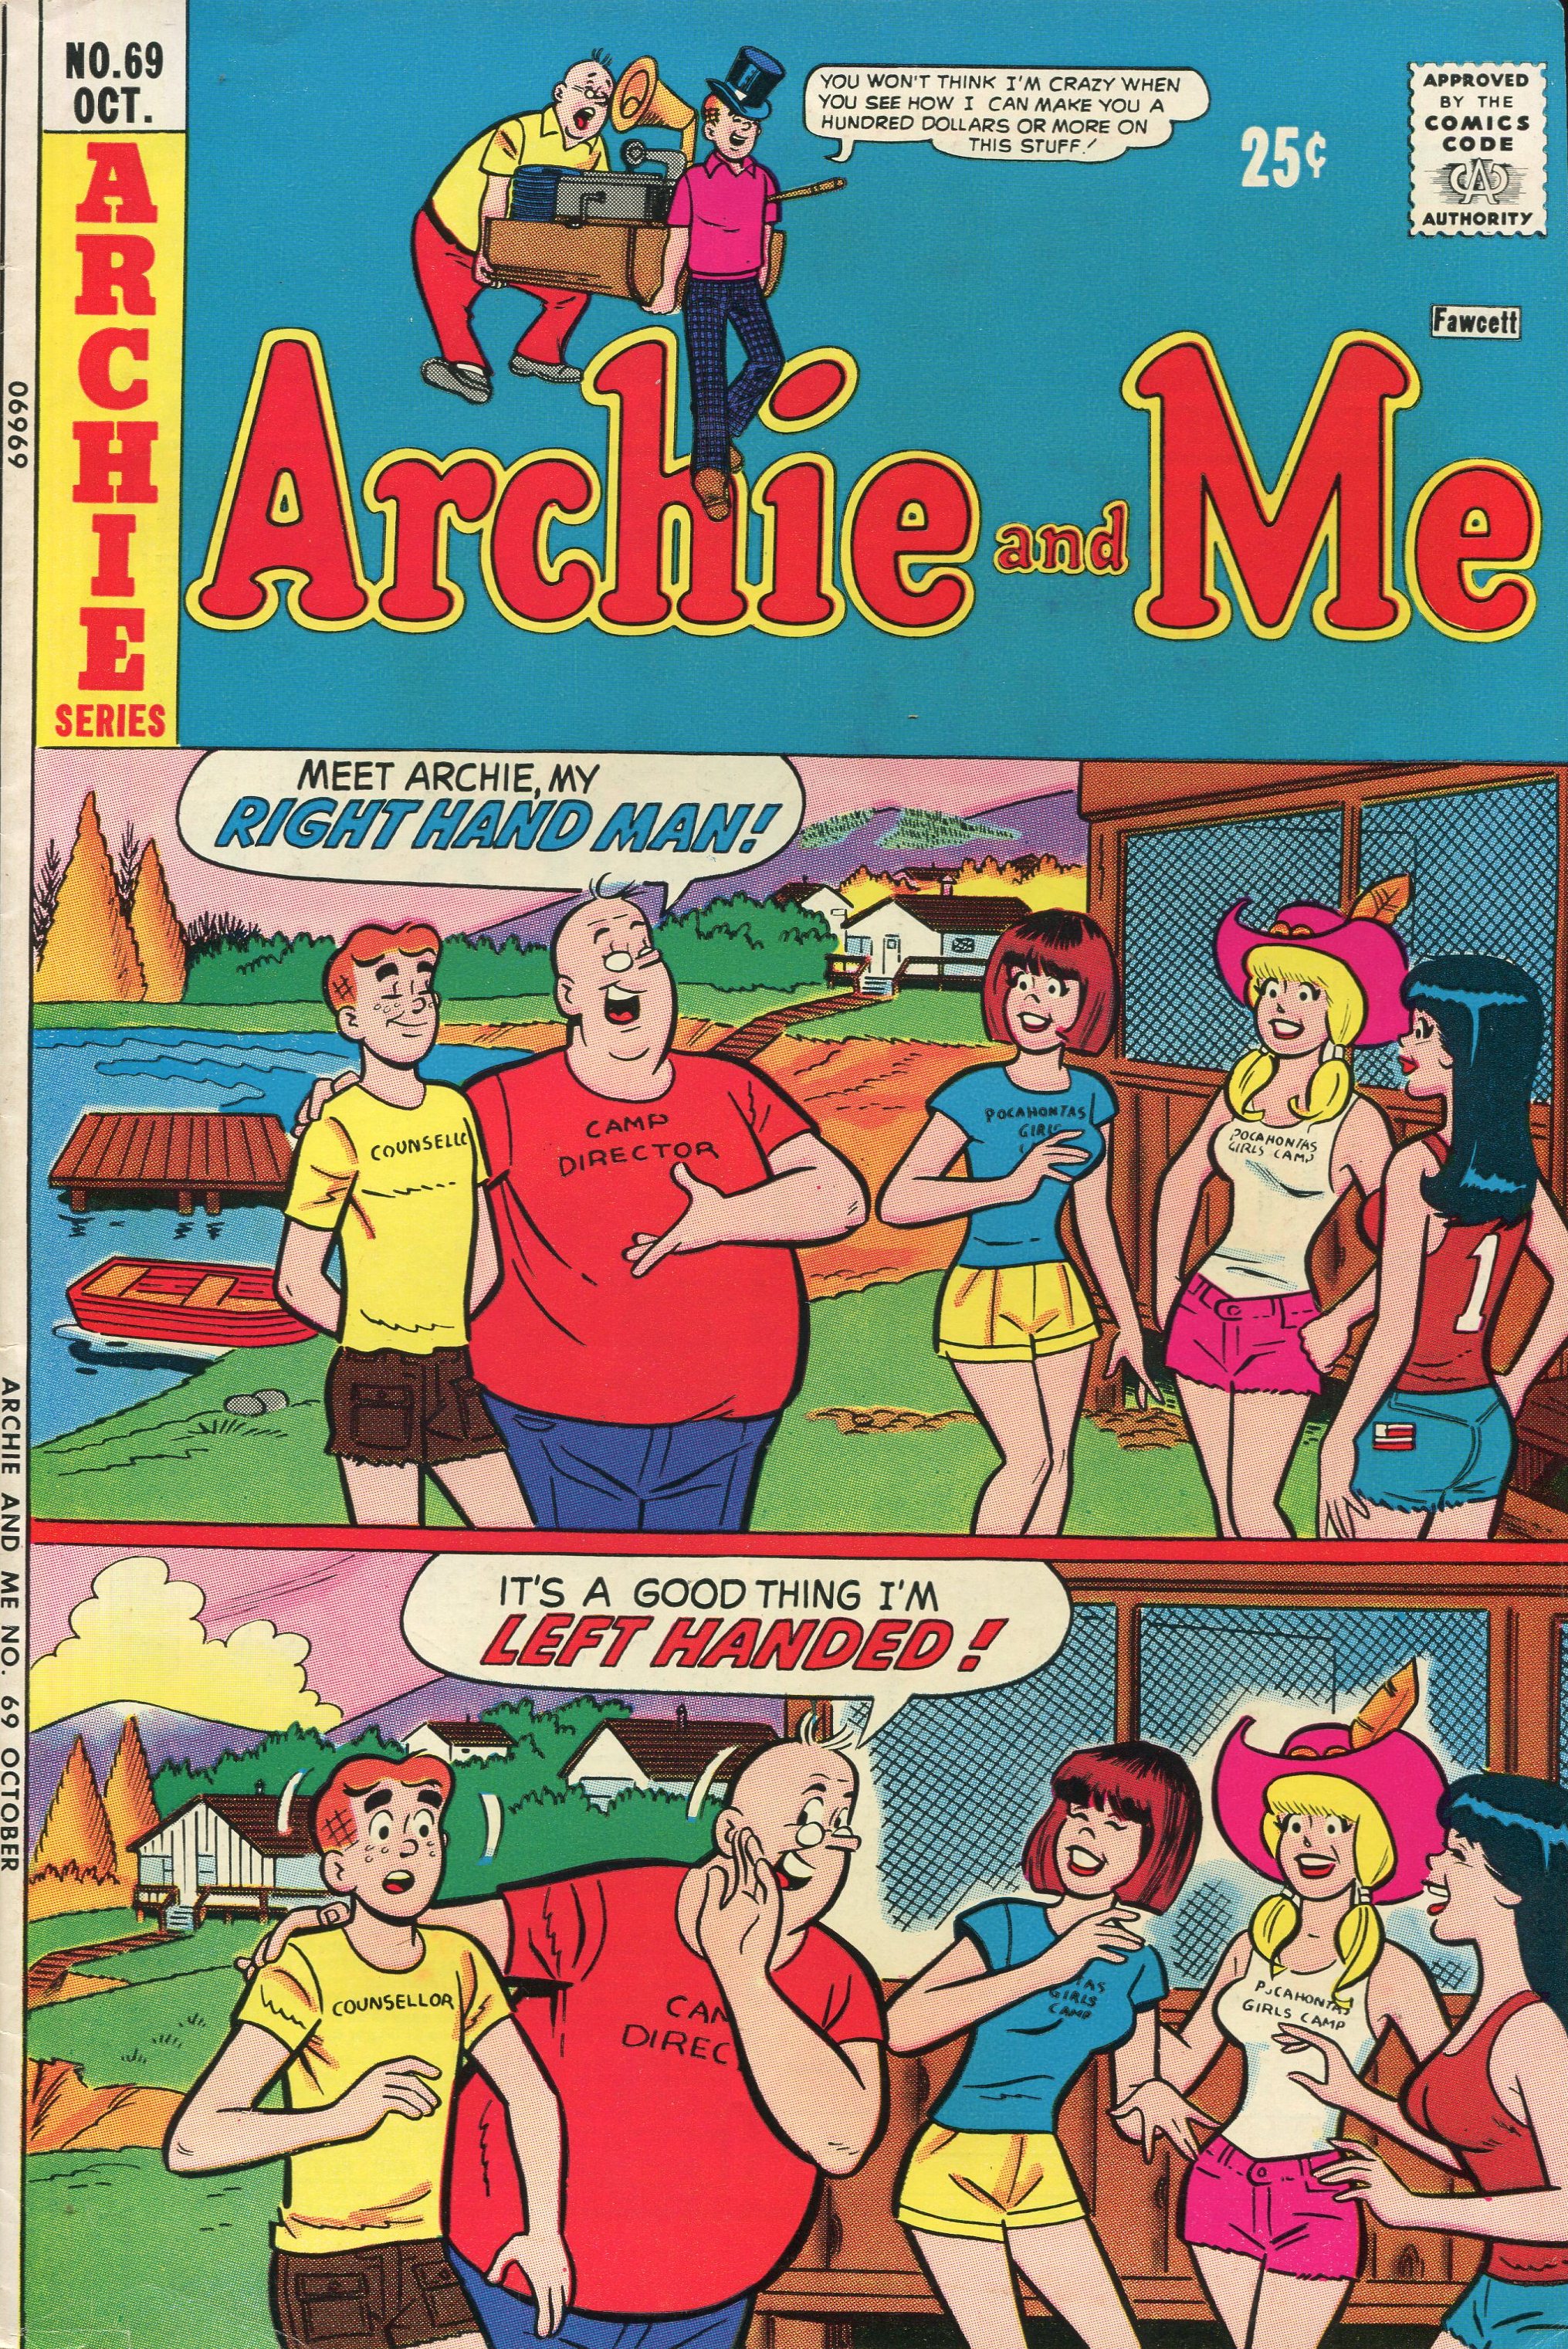 Read online Archie and Me comic -  Issue #69 - 1